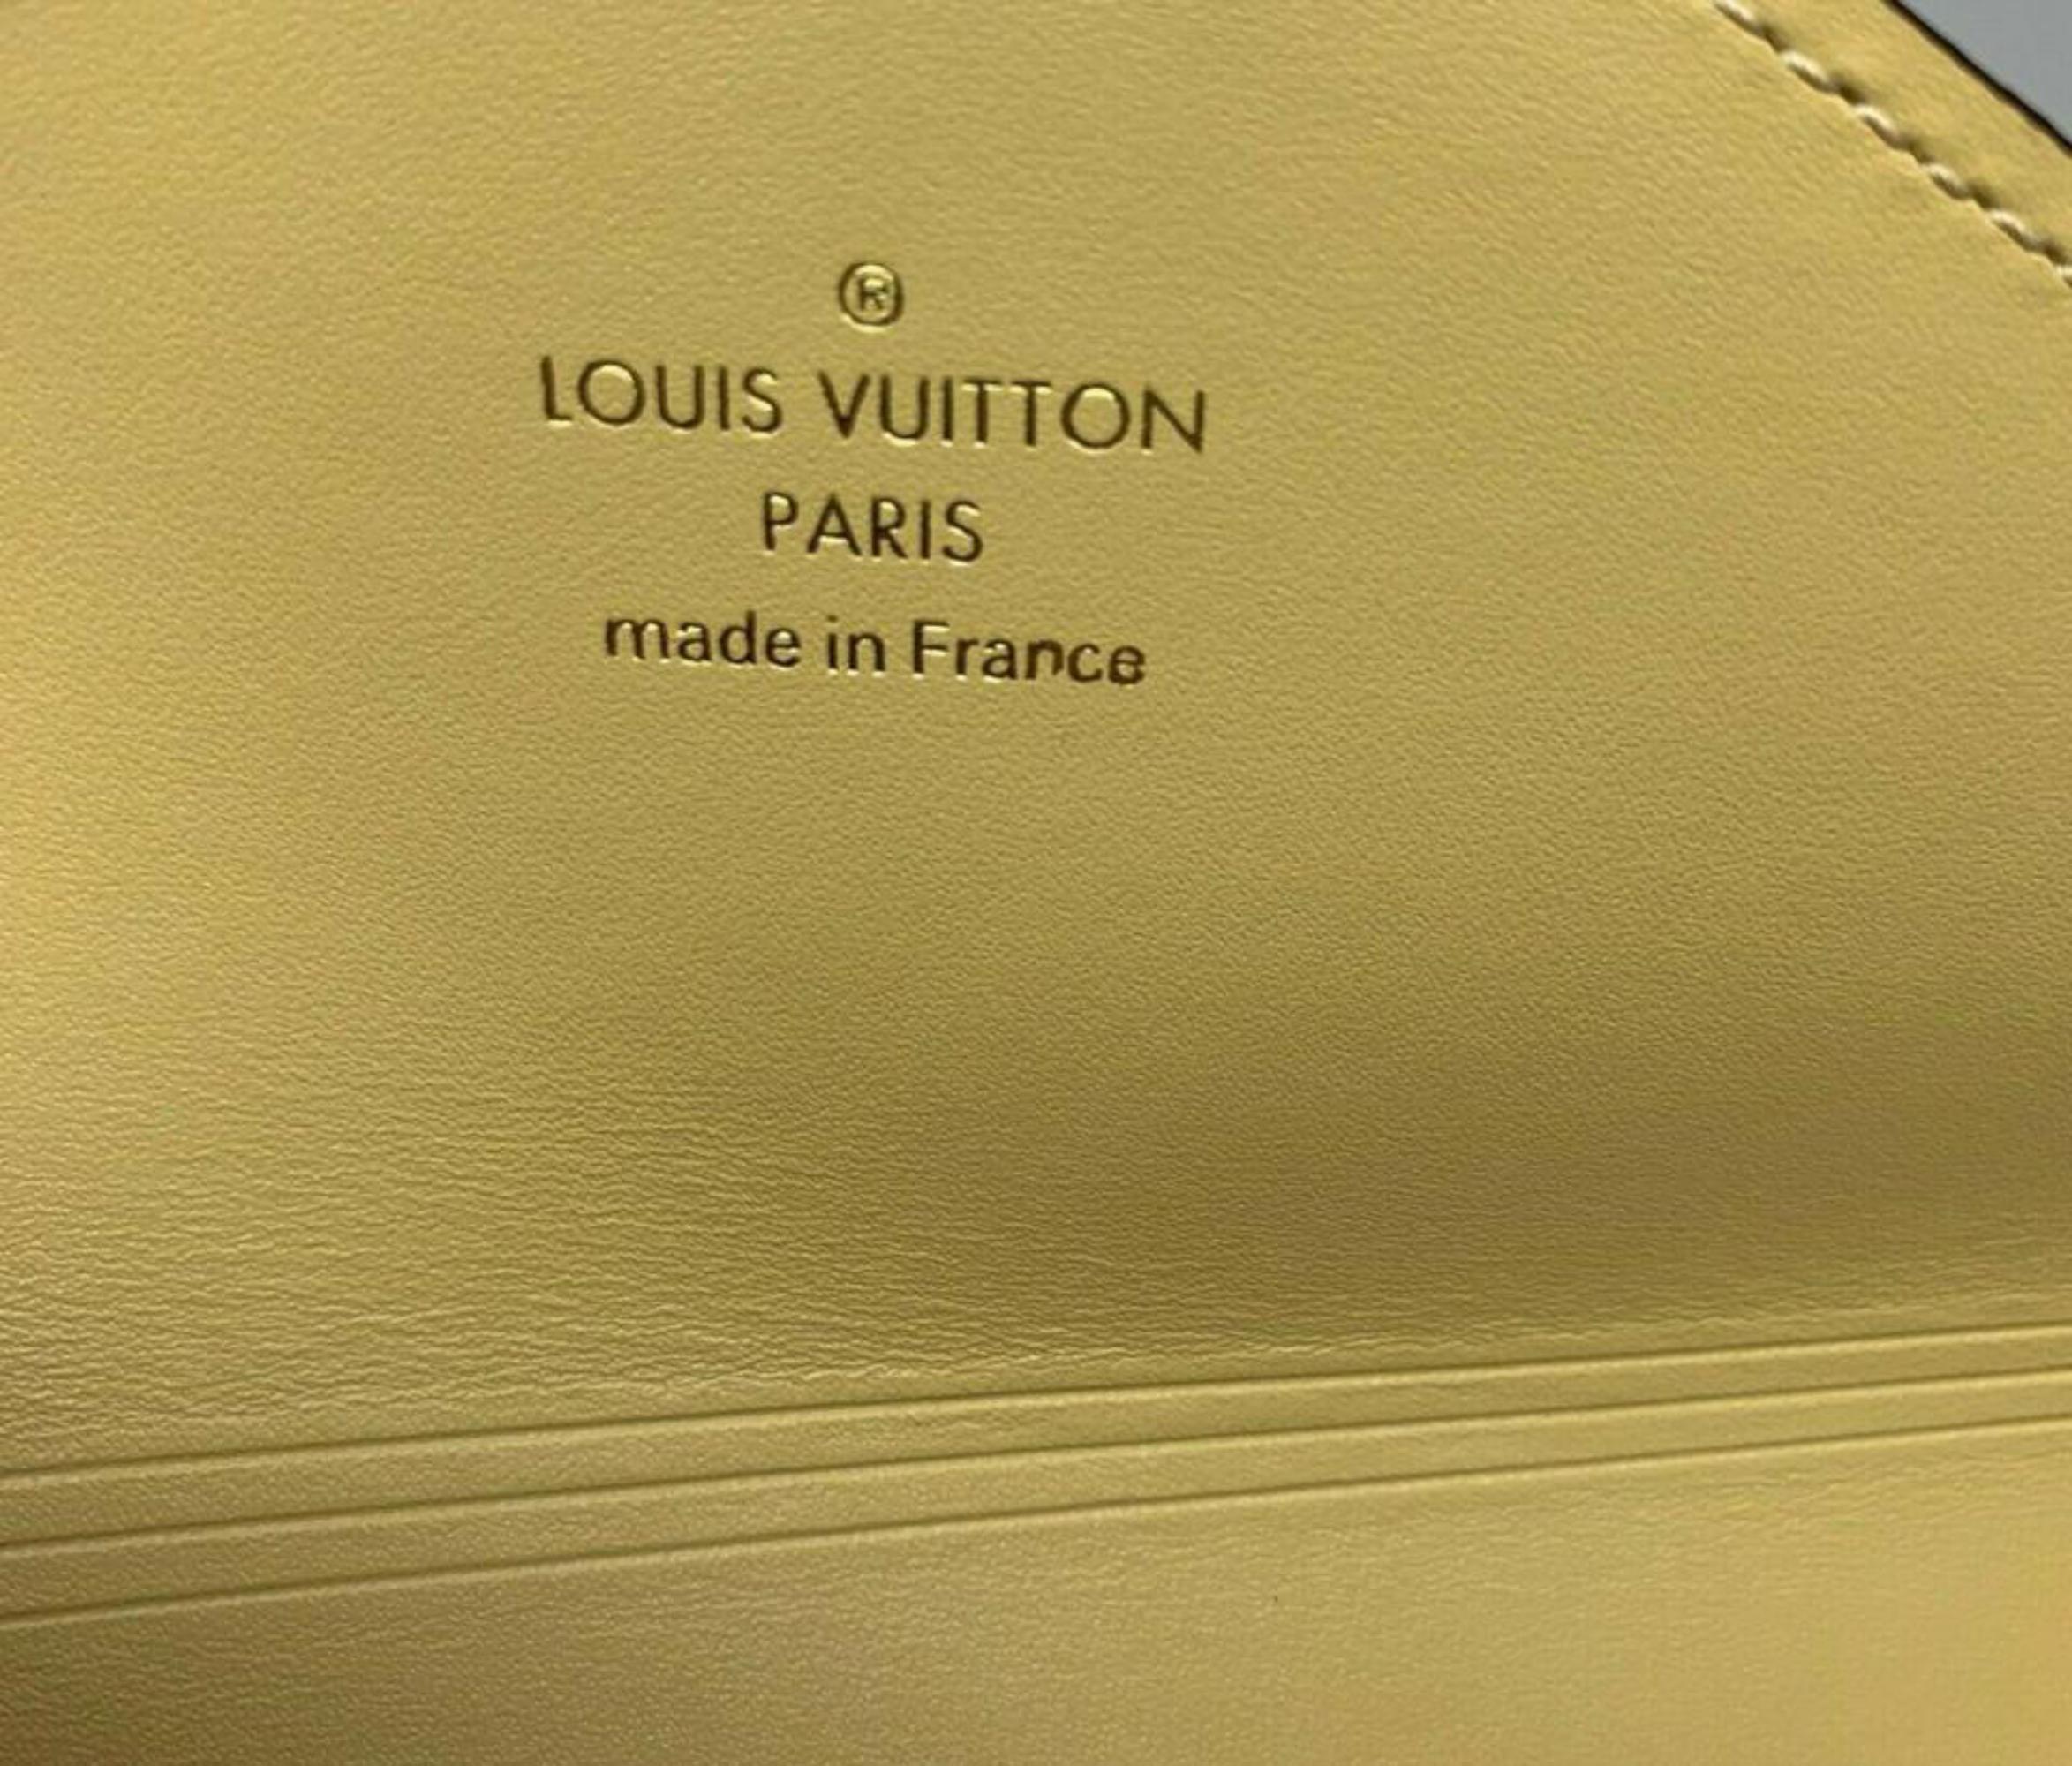 Louis Vuitton Beige Medium Ss19 Limited Edition Giant Kirigami Pouch 870619  For Sale 2